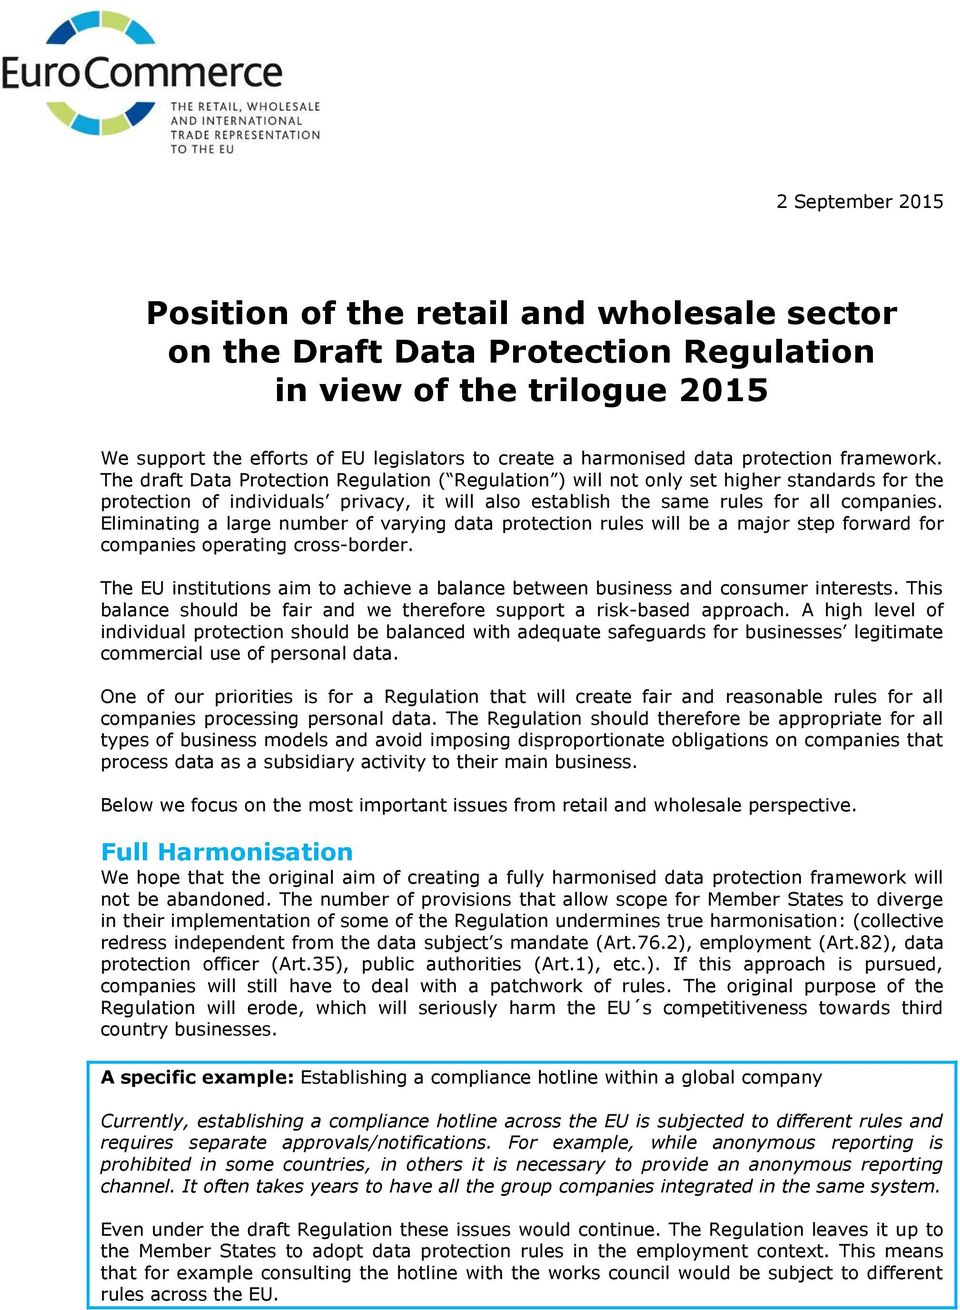 The draft Data Protection Regulation ( Regulation ) will not only set higher standards for the protection of individuals privacy, it will also establish the same rules for all companies.